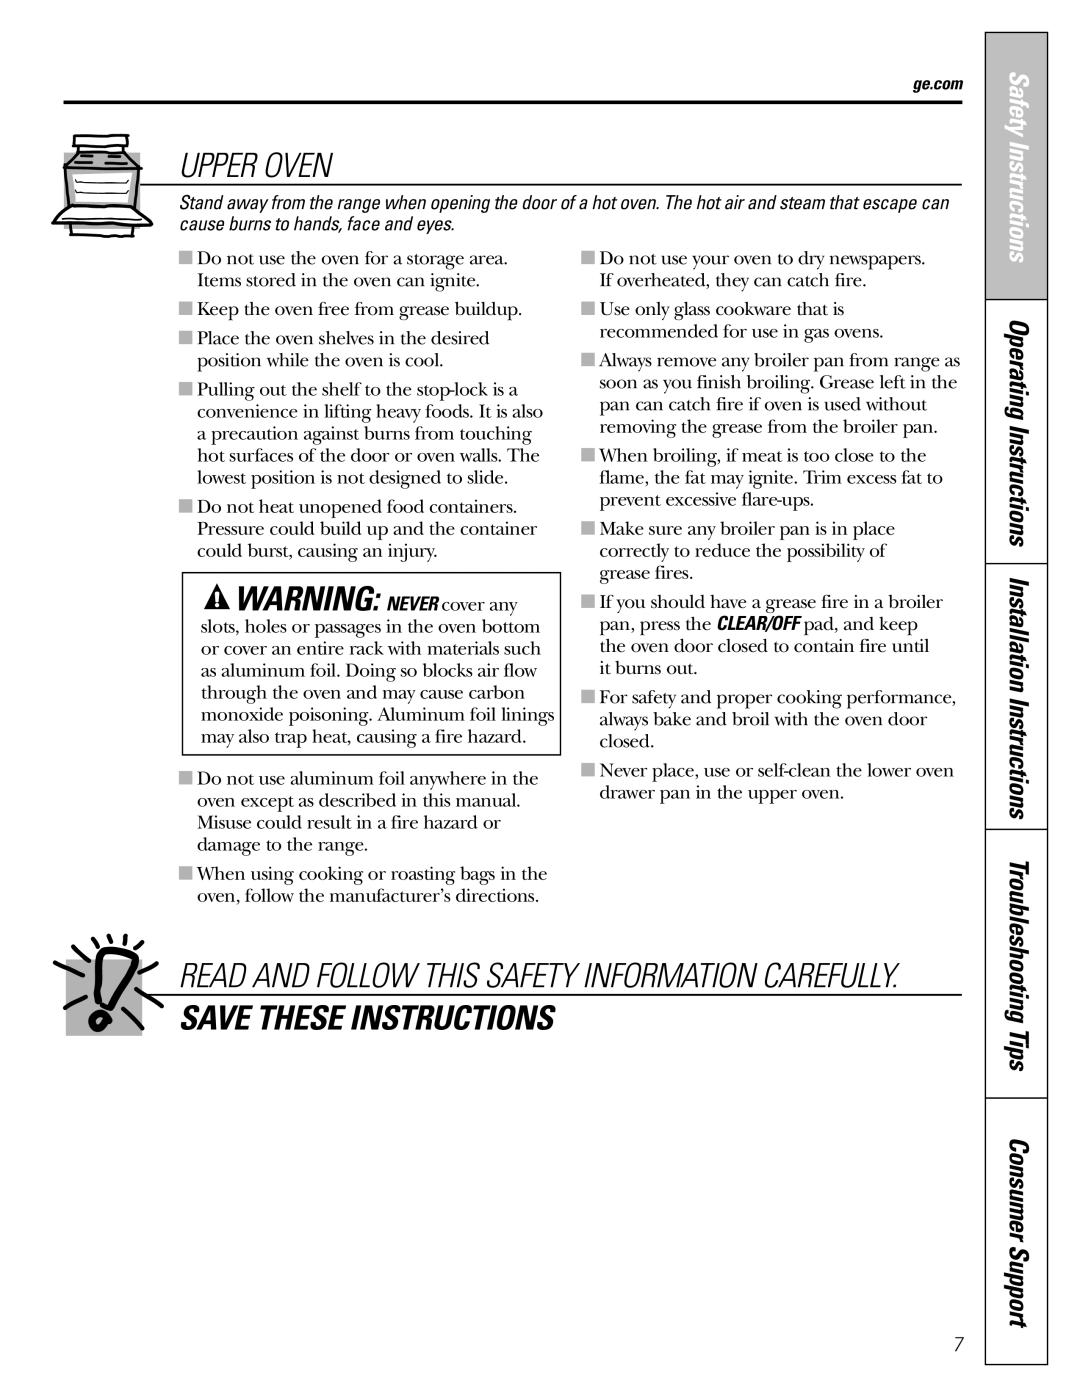 GE CGS980 Upper Oven, WARNING NEVER cover any, Save These Instructions, Tips Consumer Support, Safety Instructions 